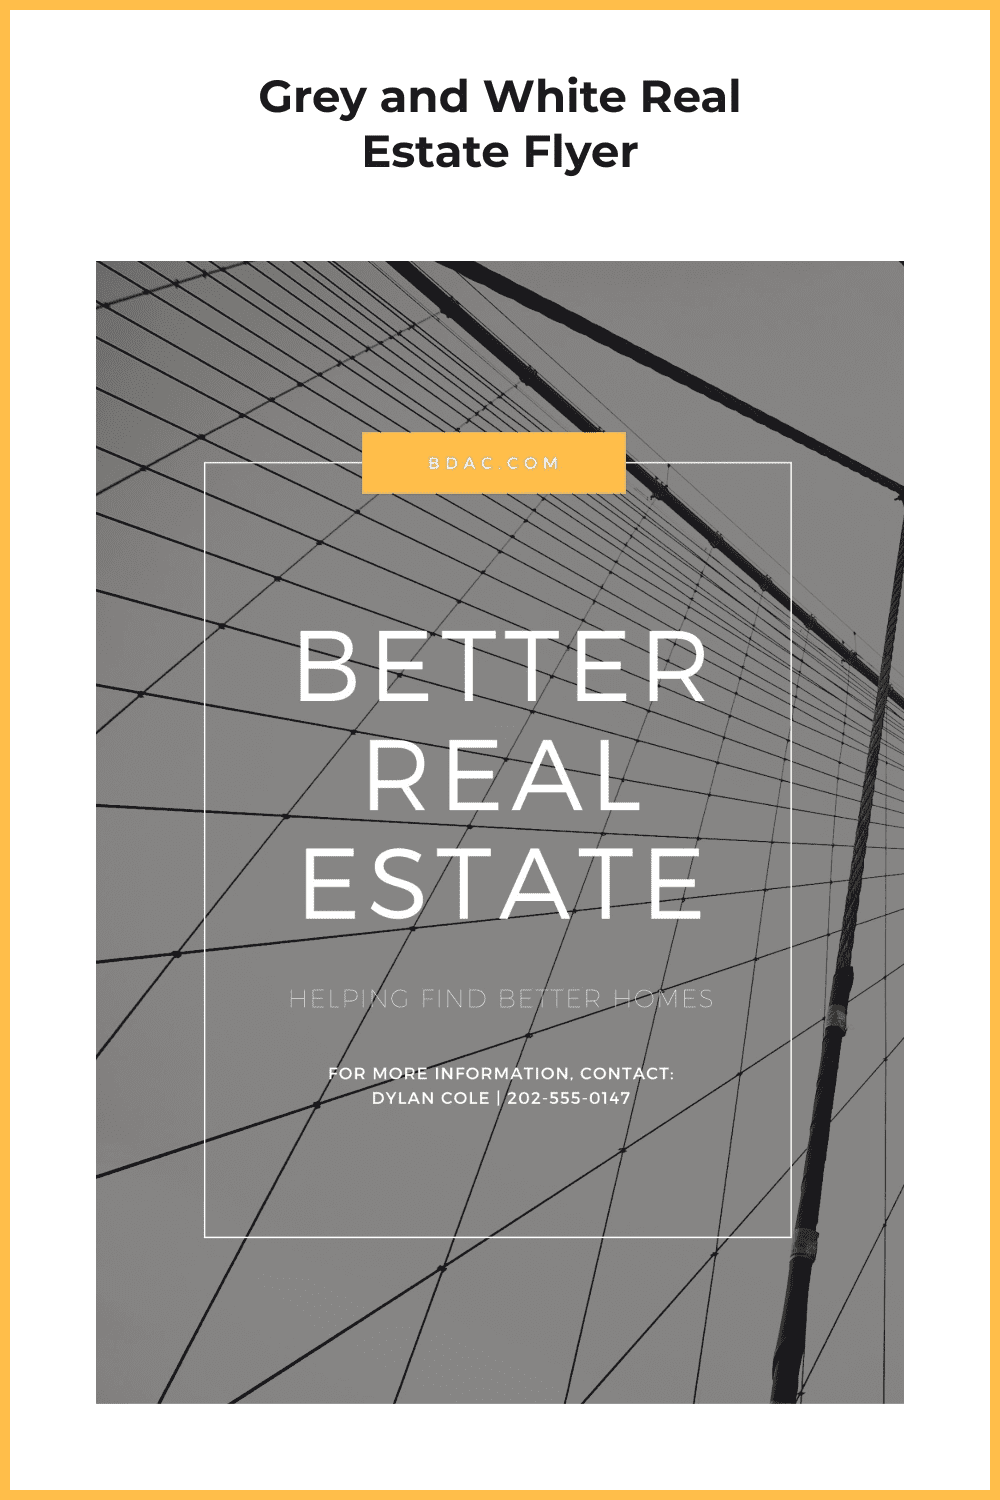 Grey and white real estate flyer.